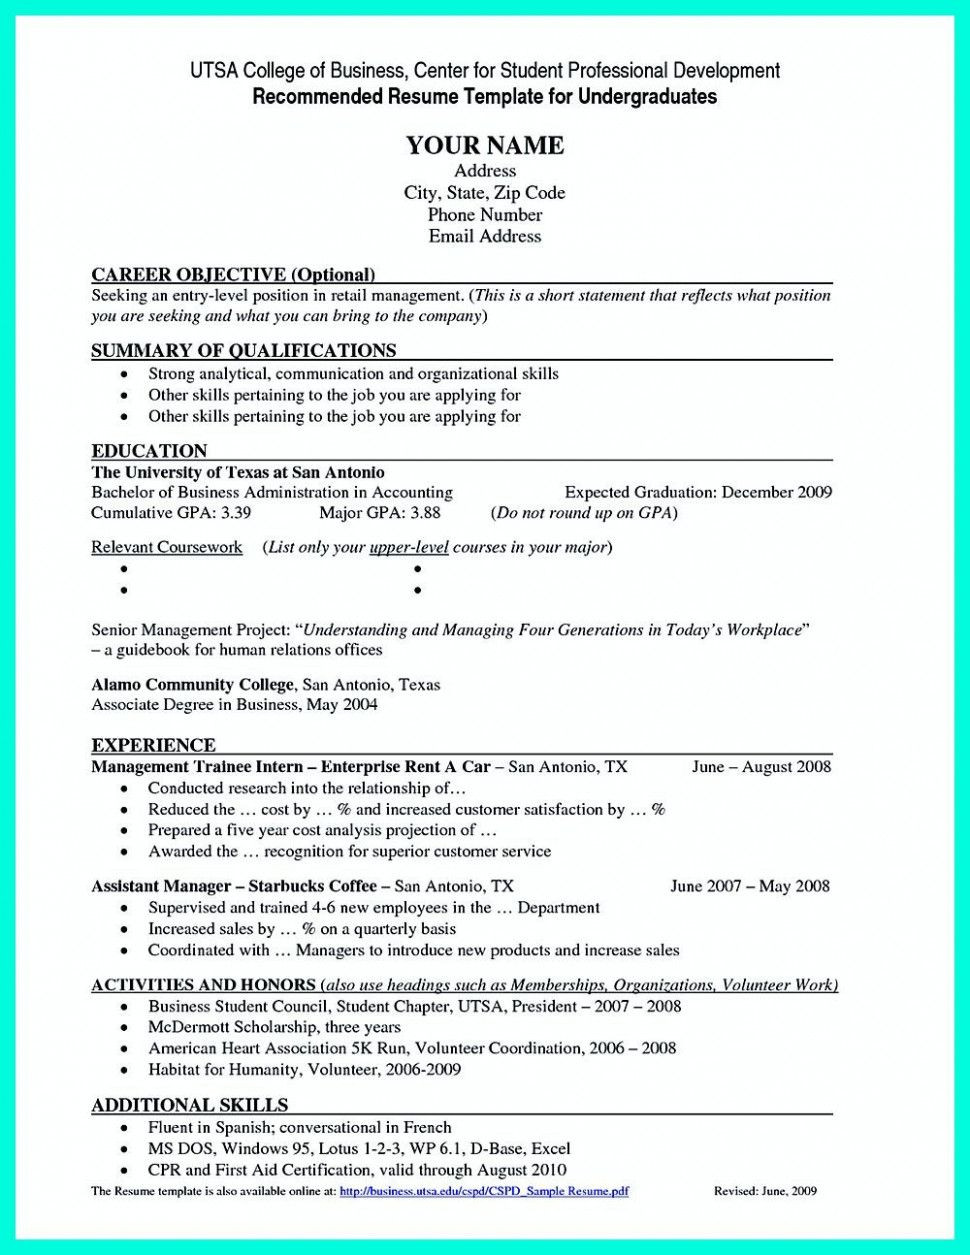 Resume Samples for College Students Pdf 12 Pupil Resume Examples Pdf Job Resume Examples, College Resume …